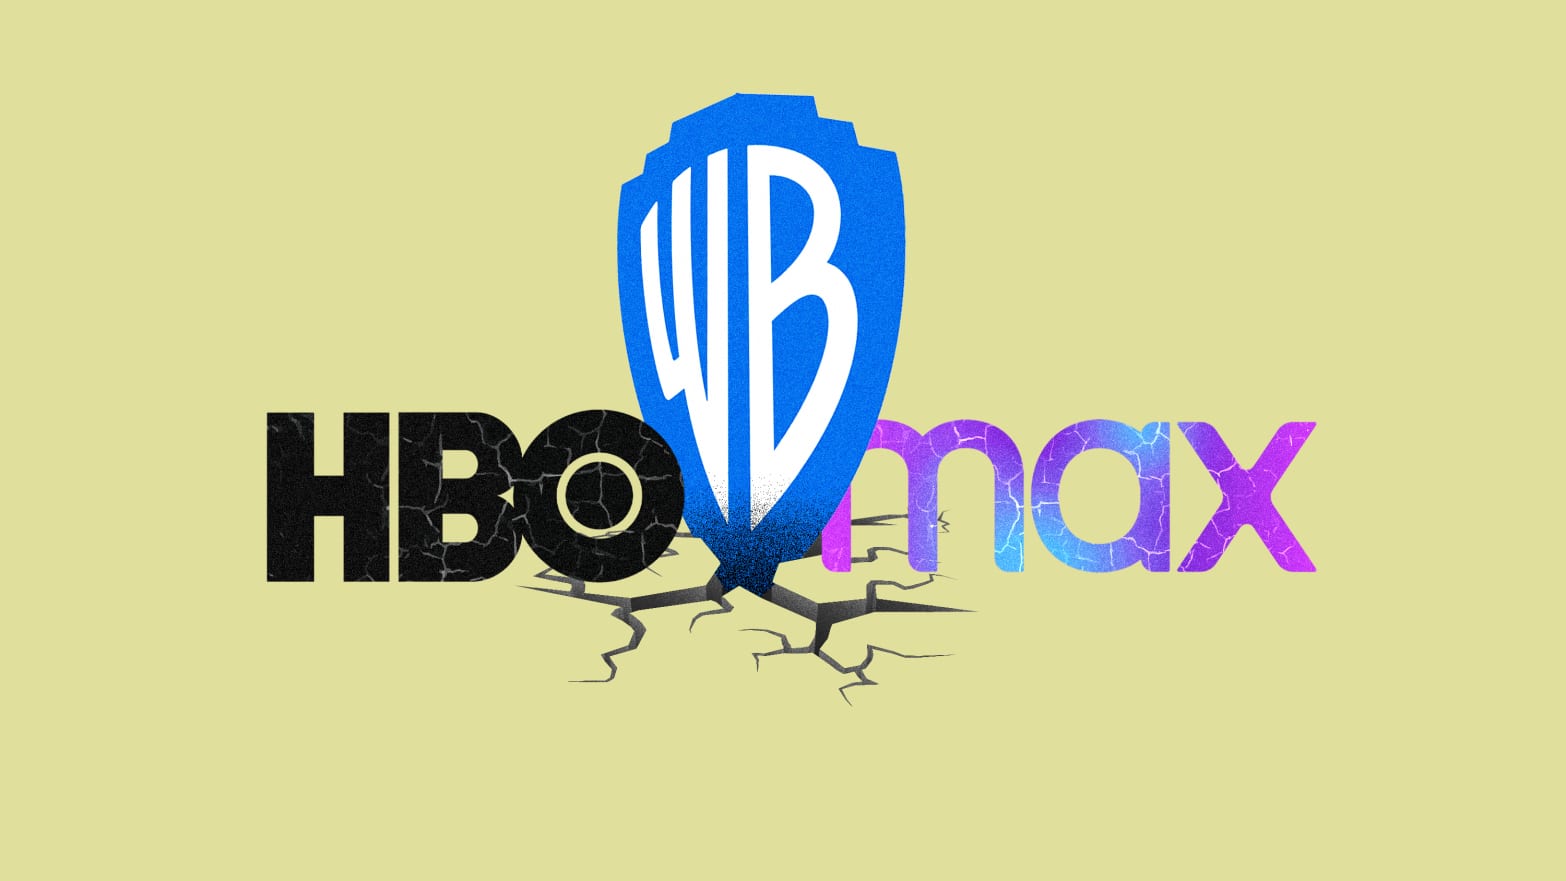 HBO Max is removing some of its best movies and shows this month